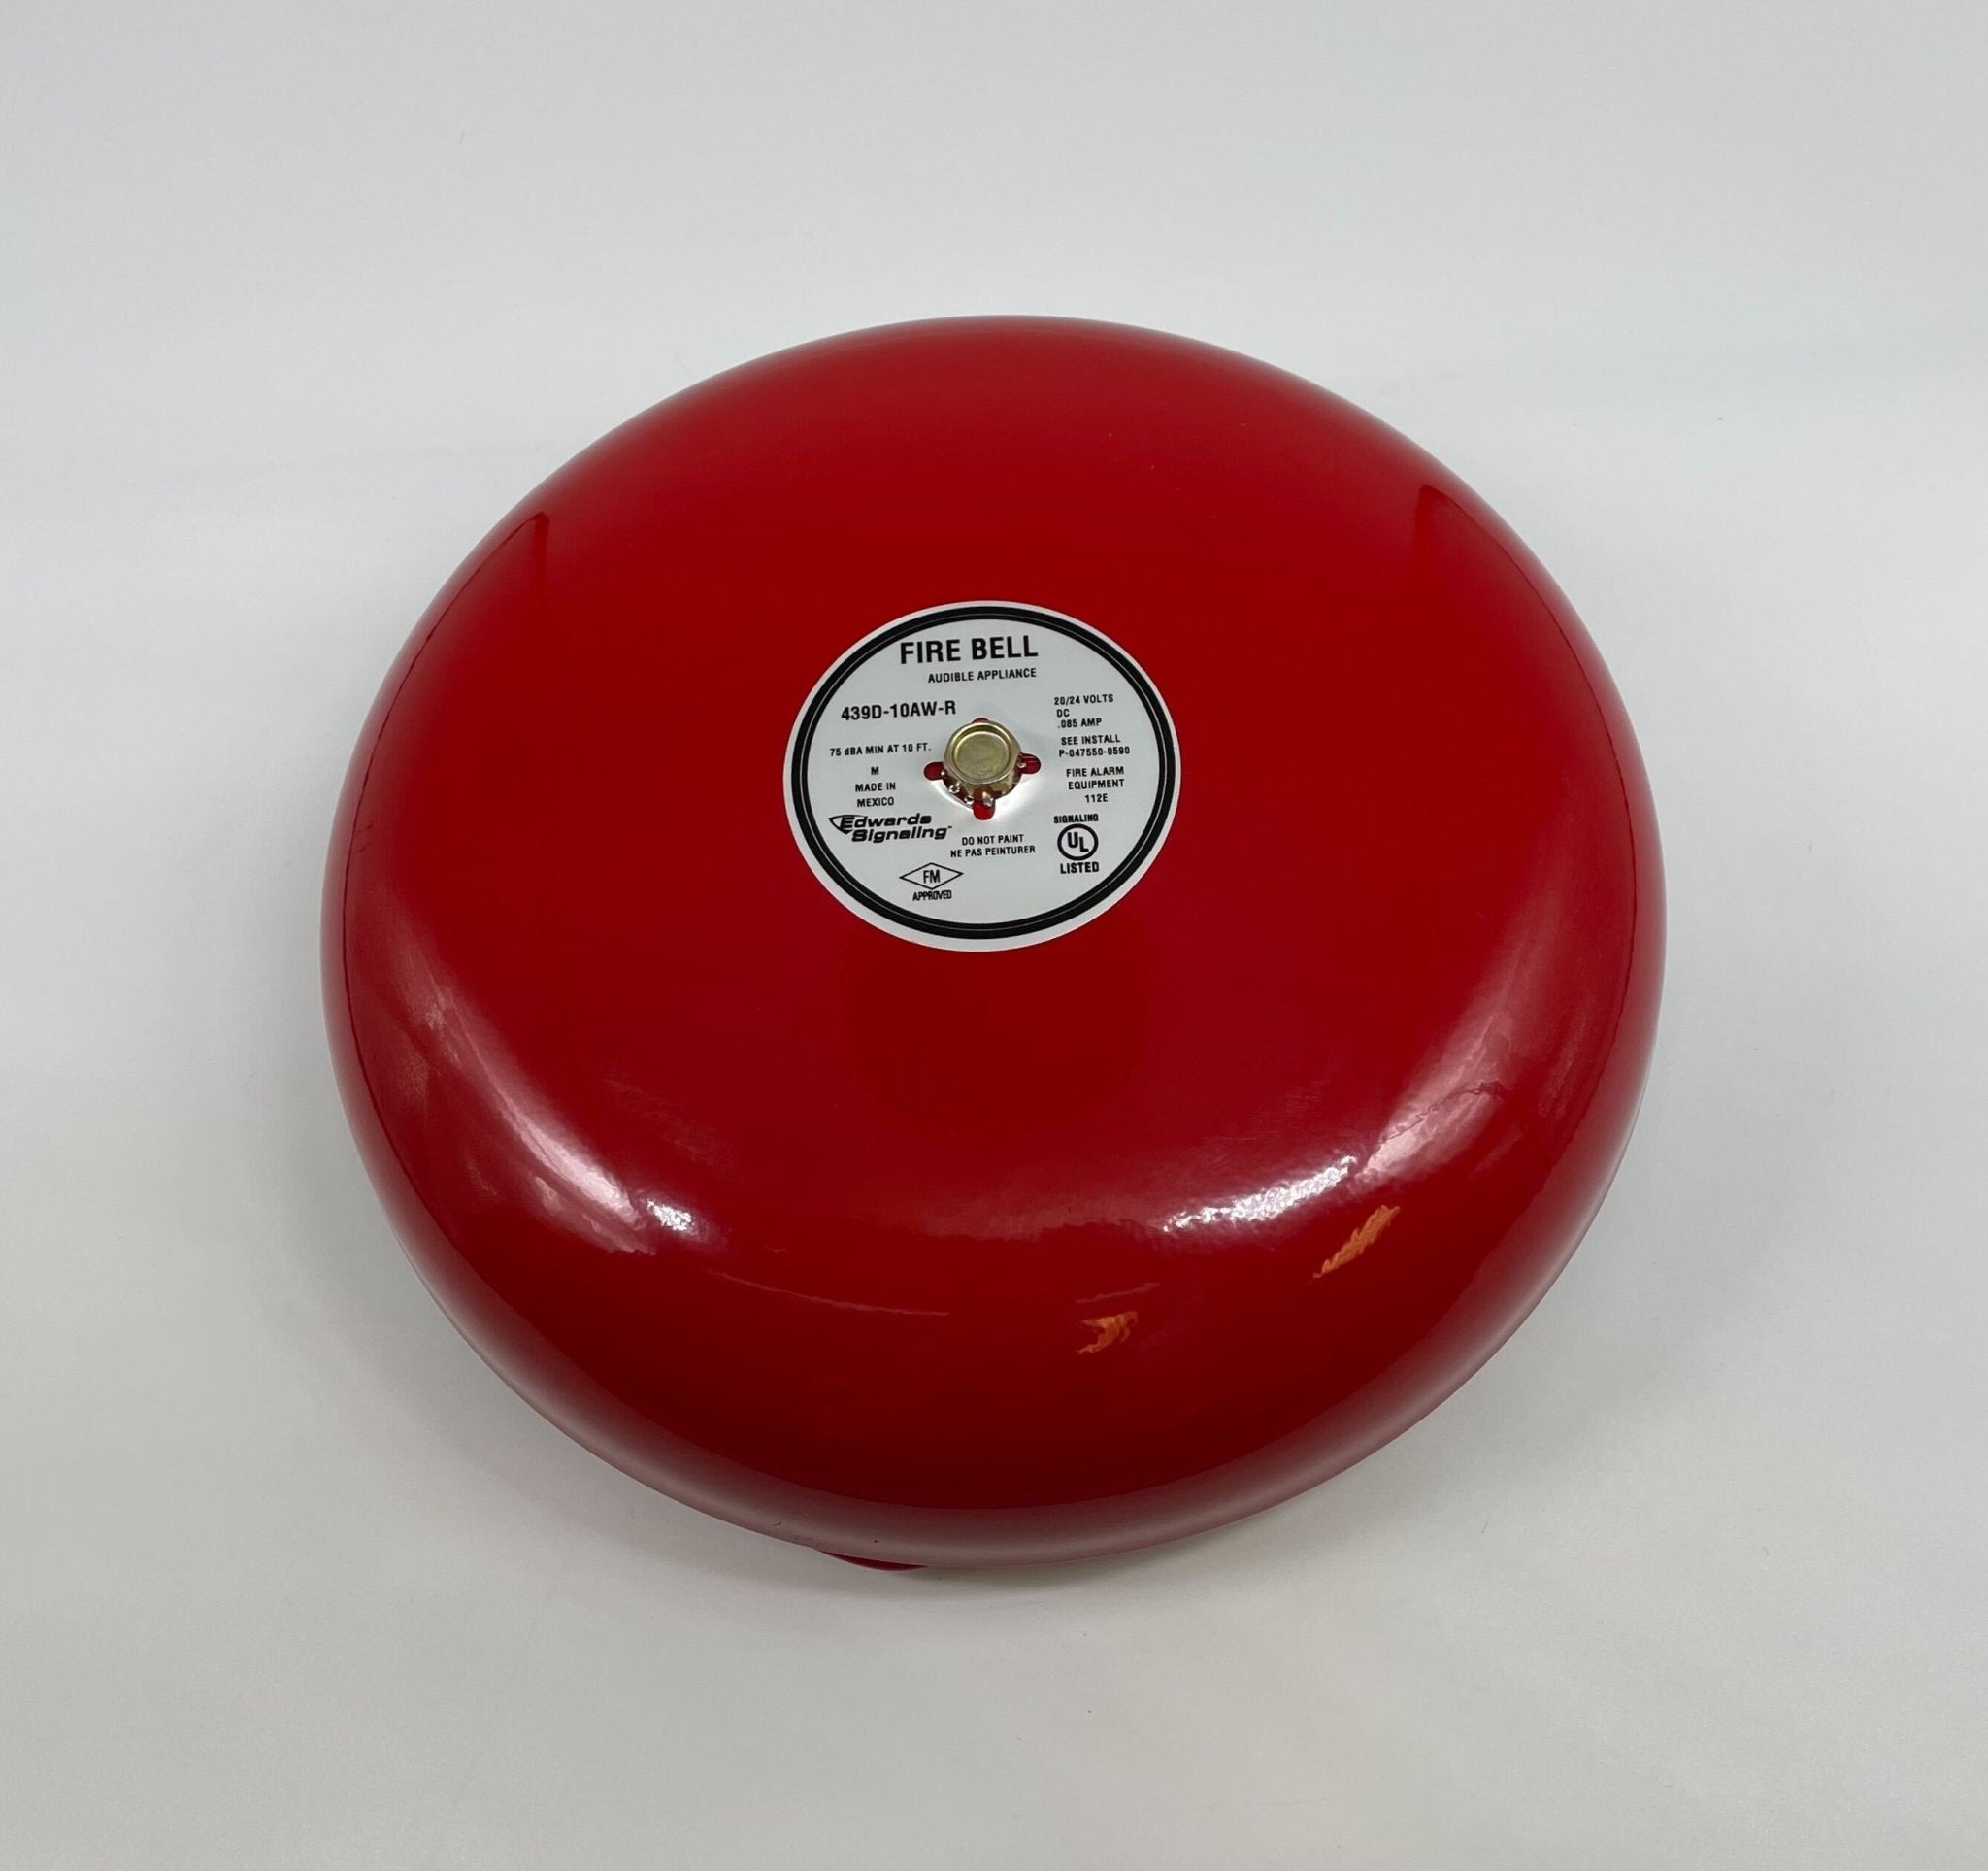 Edwards 439D-10AW-R - The Fire Alarm Supplier